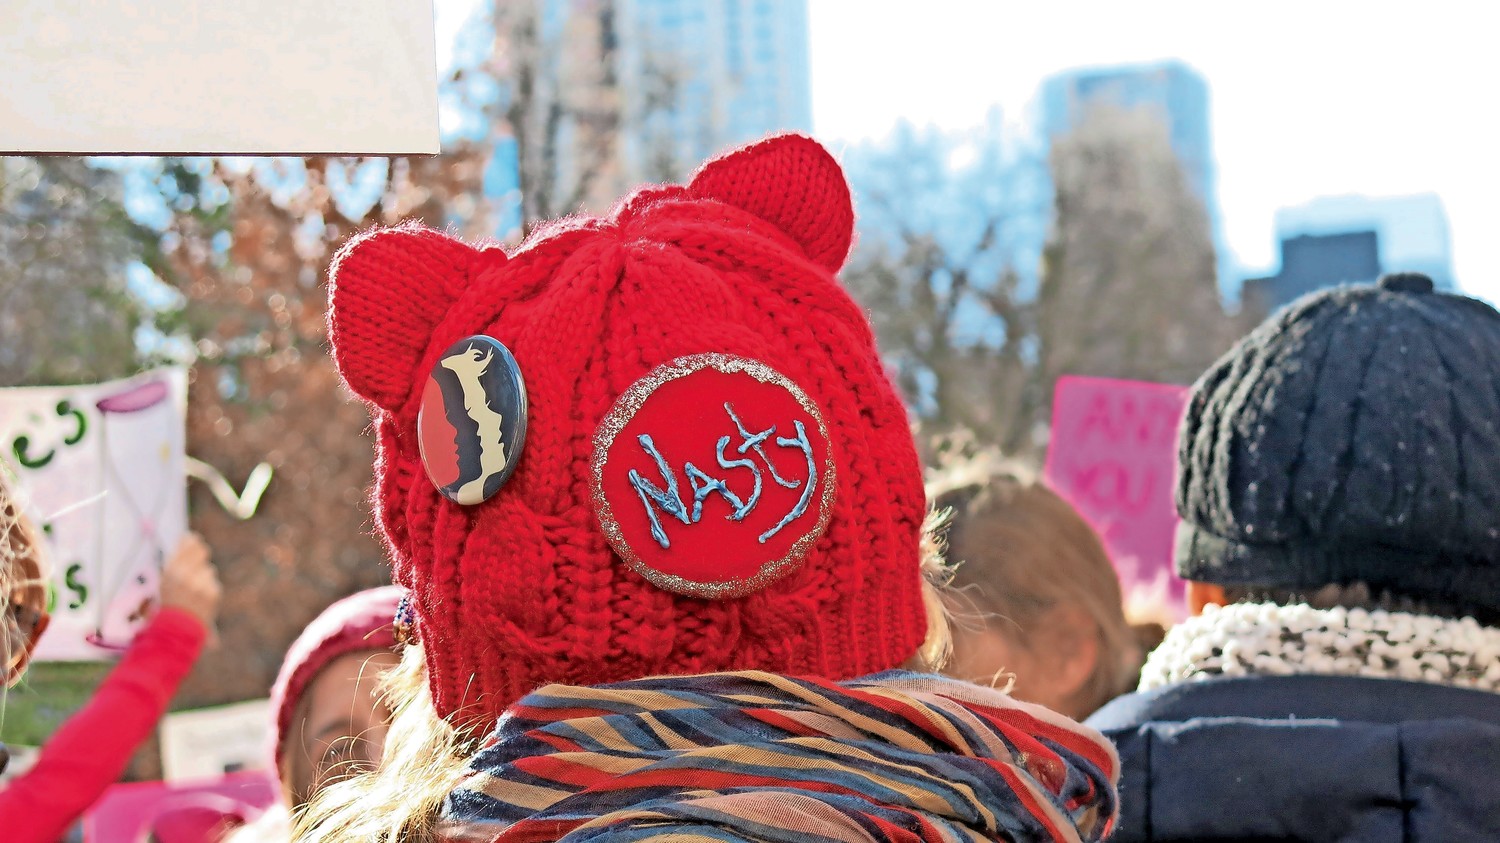 An estimated 200,000 people attended the second New York City Women’s March on Jan. 20. The hot-pink hat that made its mark at last year’s march was seen once again.